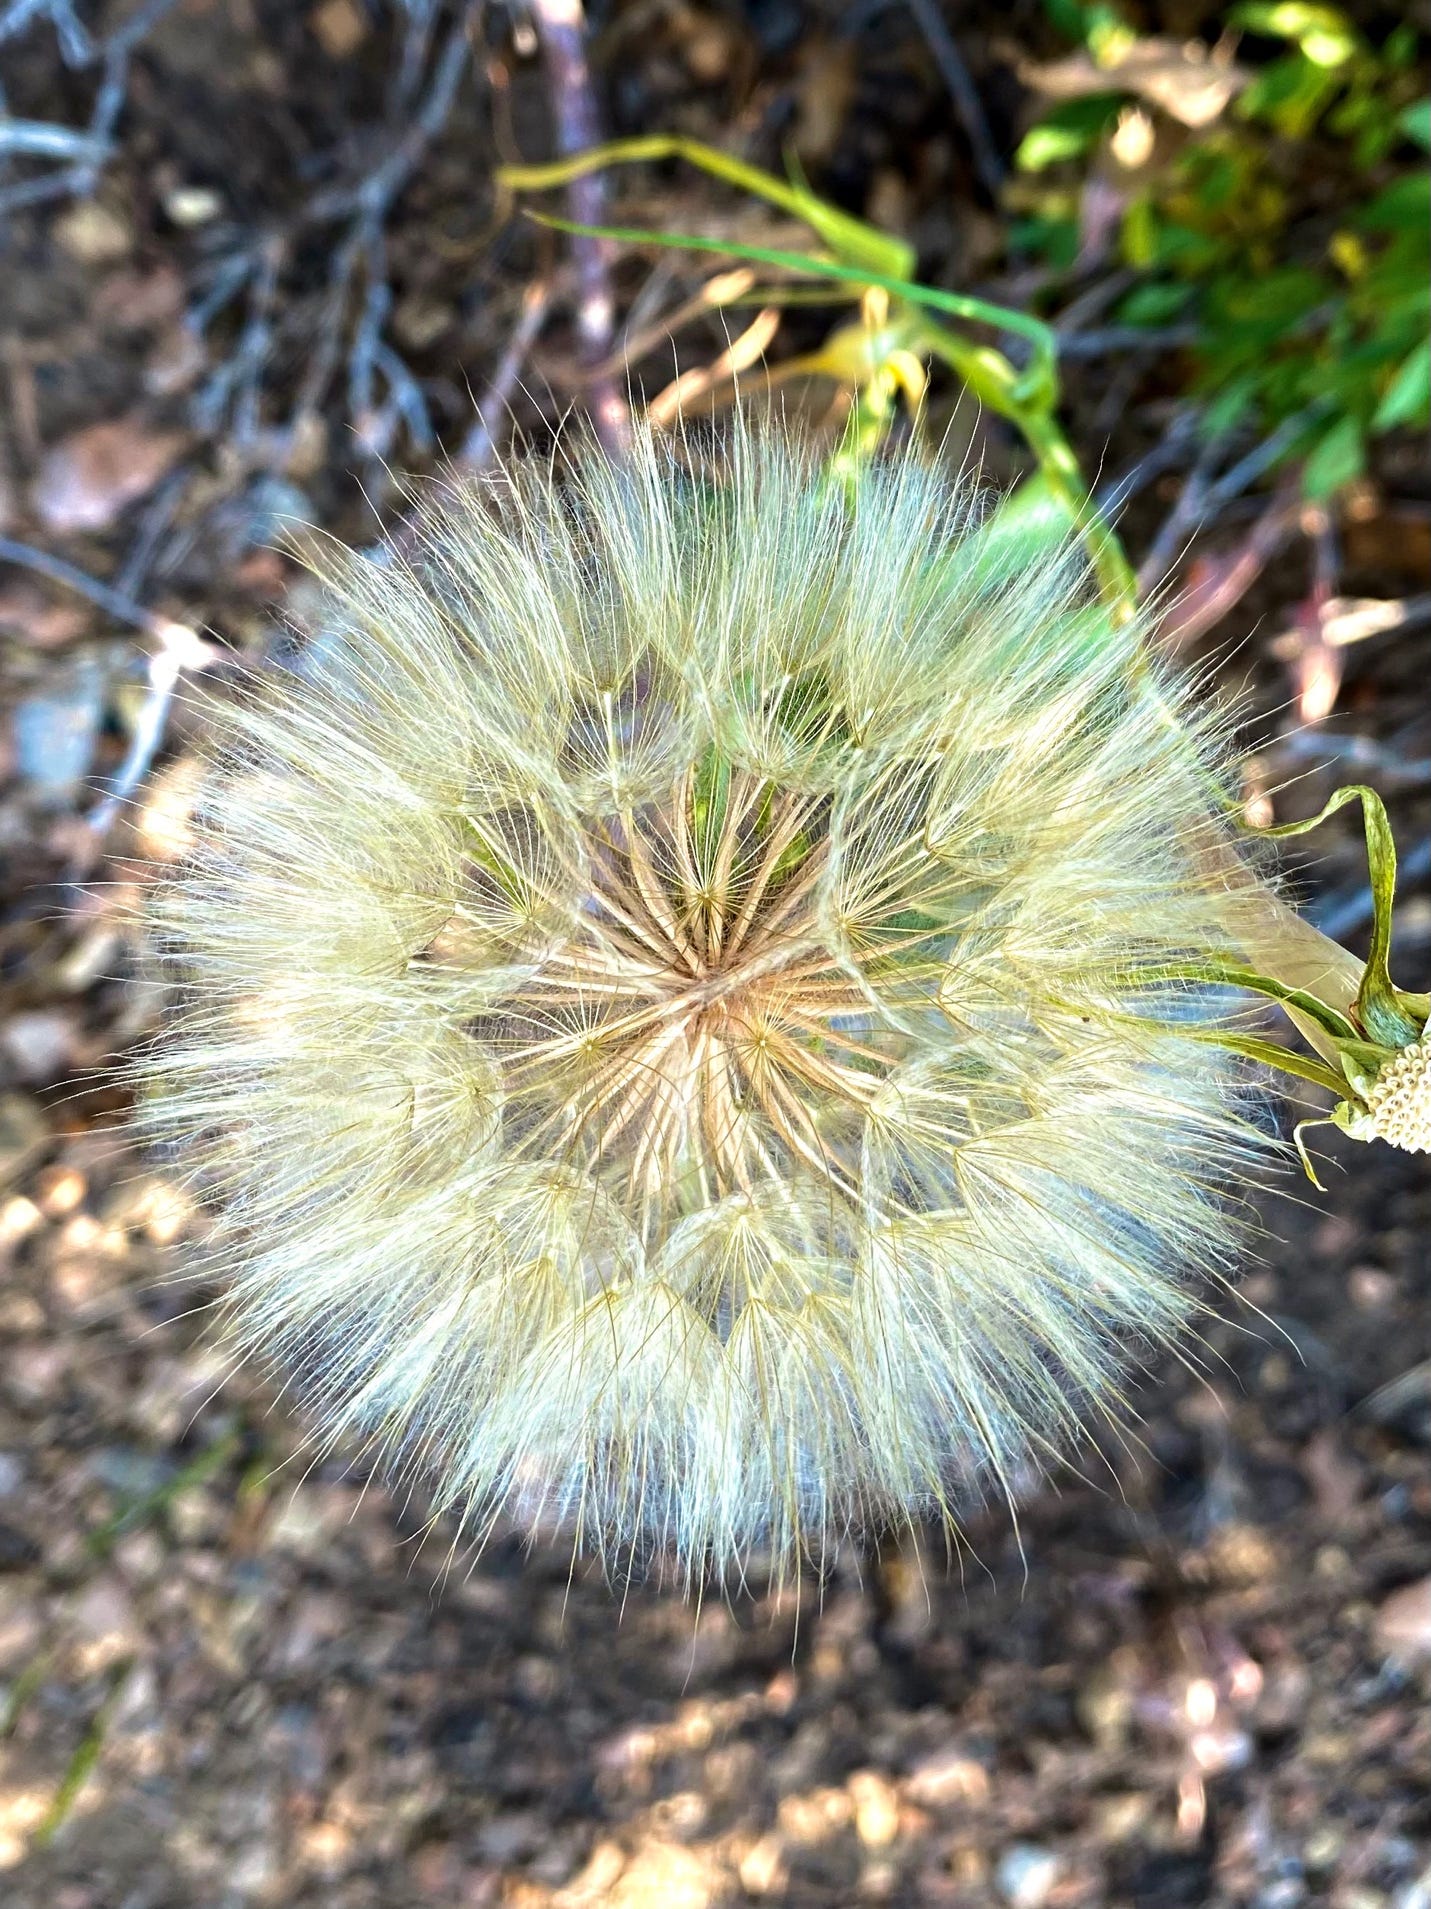 A close up of a dandelion

Description automatically generated